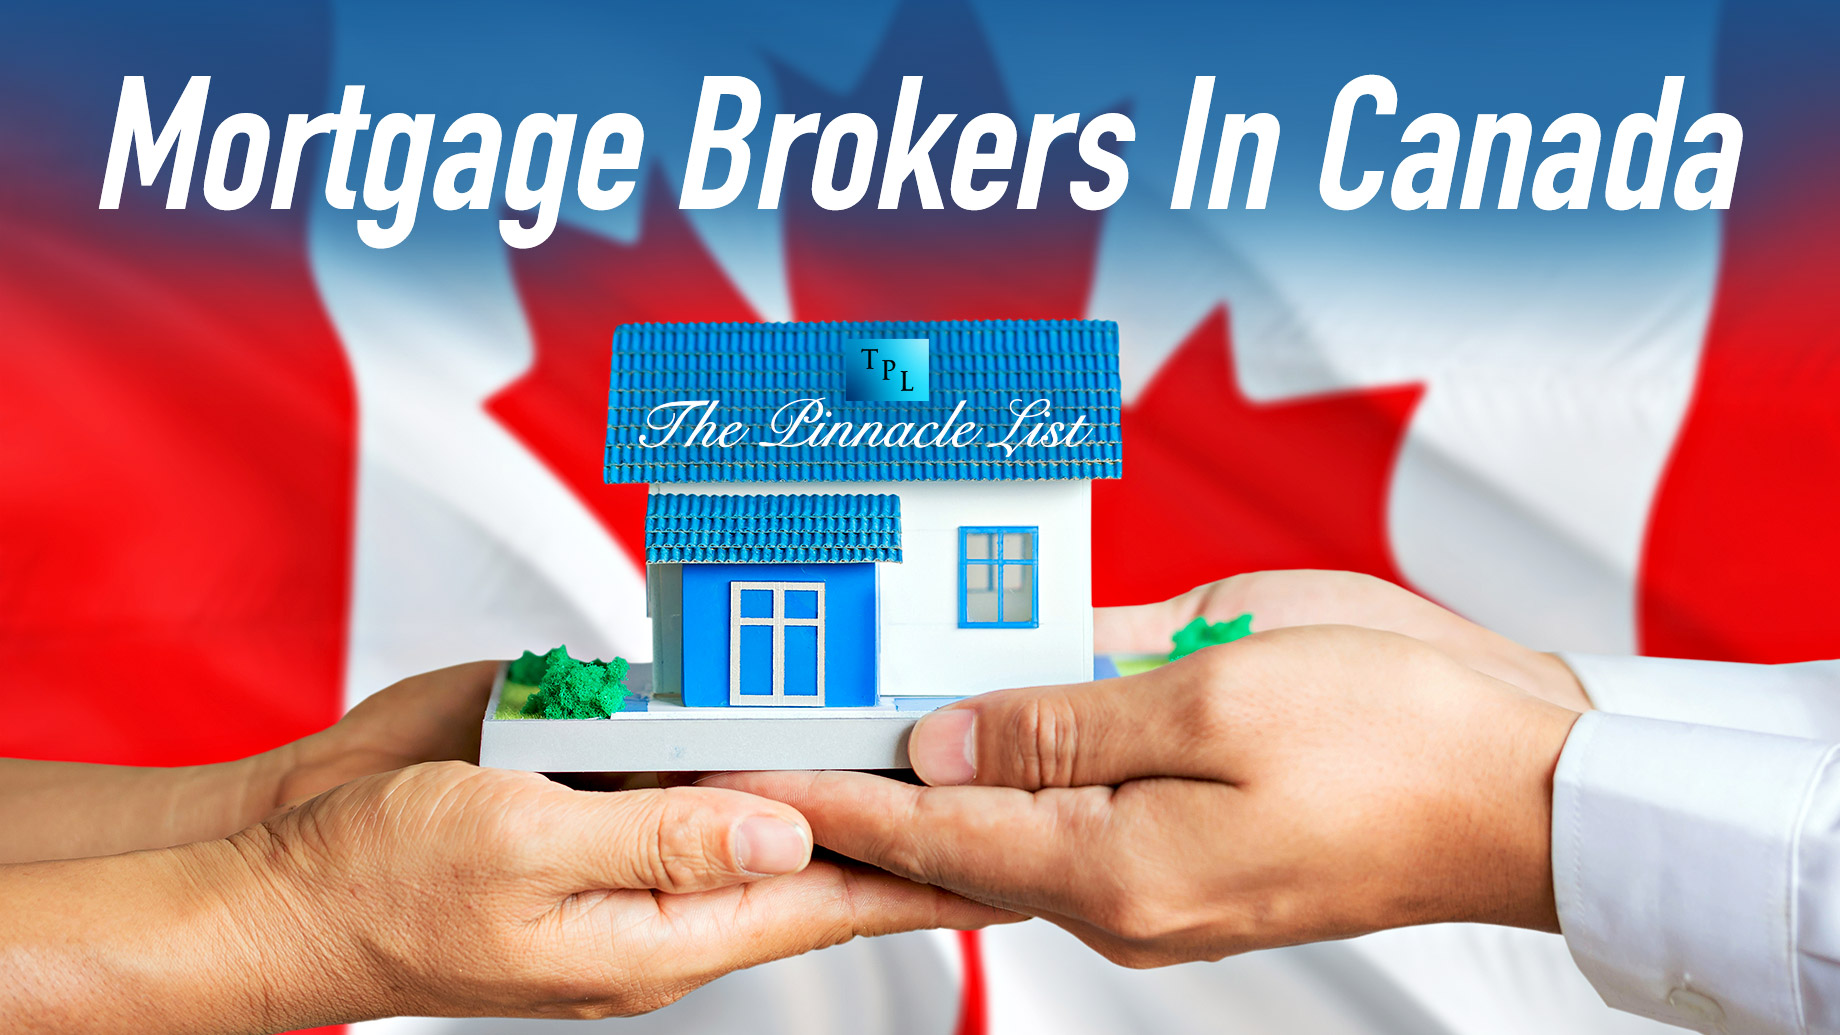 Mortgage Brokers In Canada